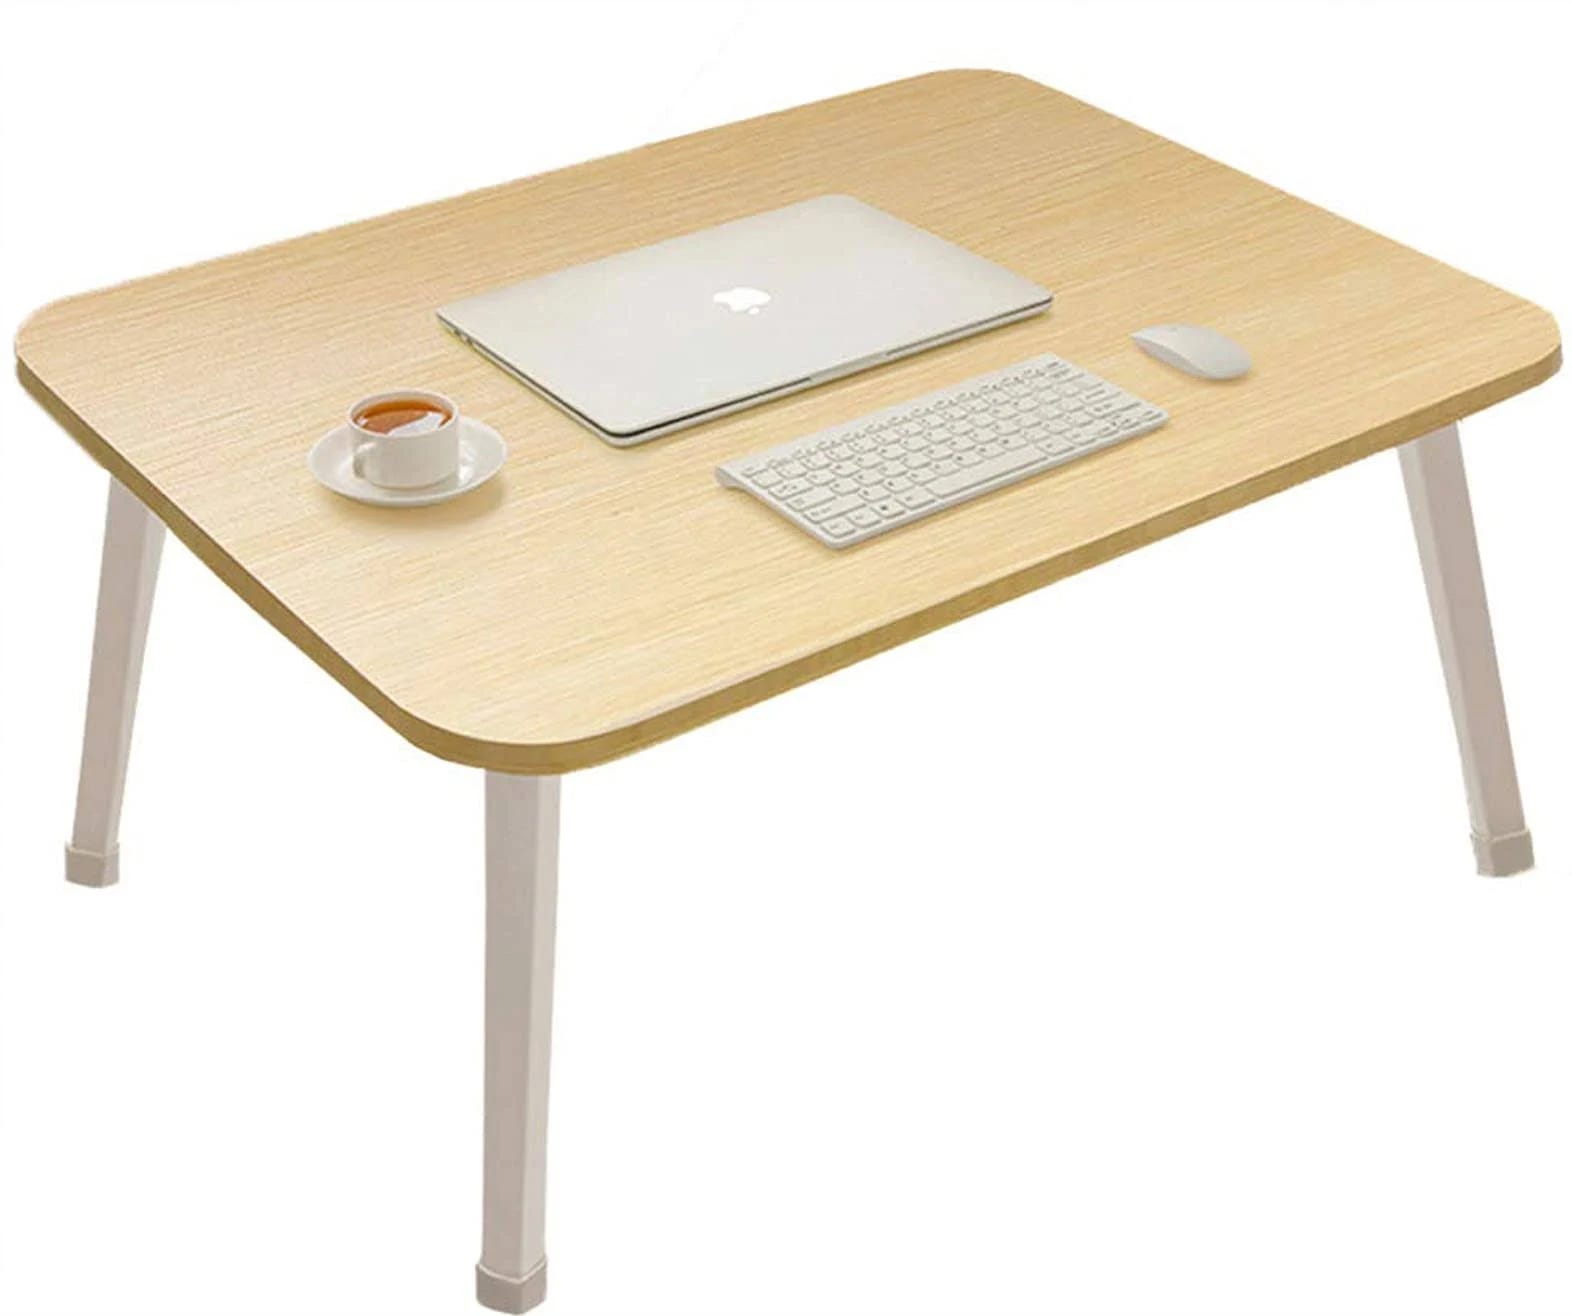 Practical Portable Laptop Bed Desk for Home and Office Use | Image